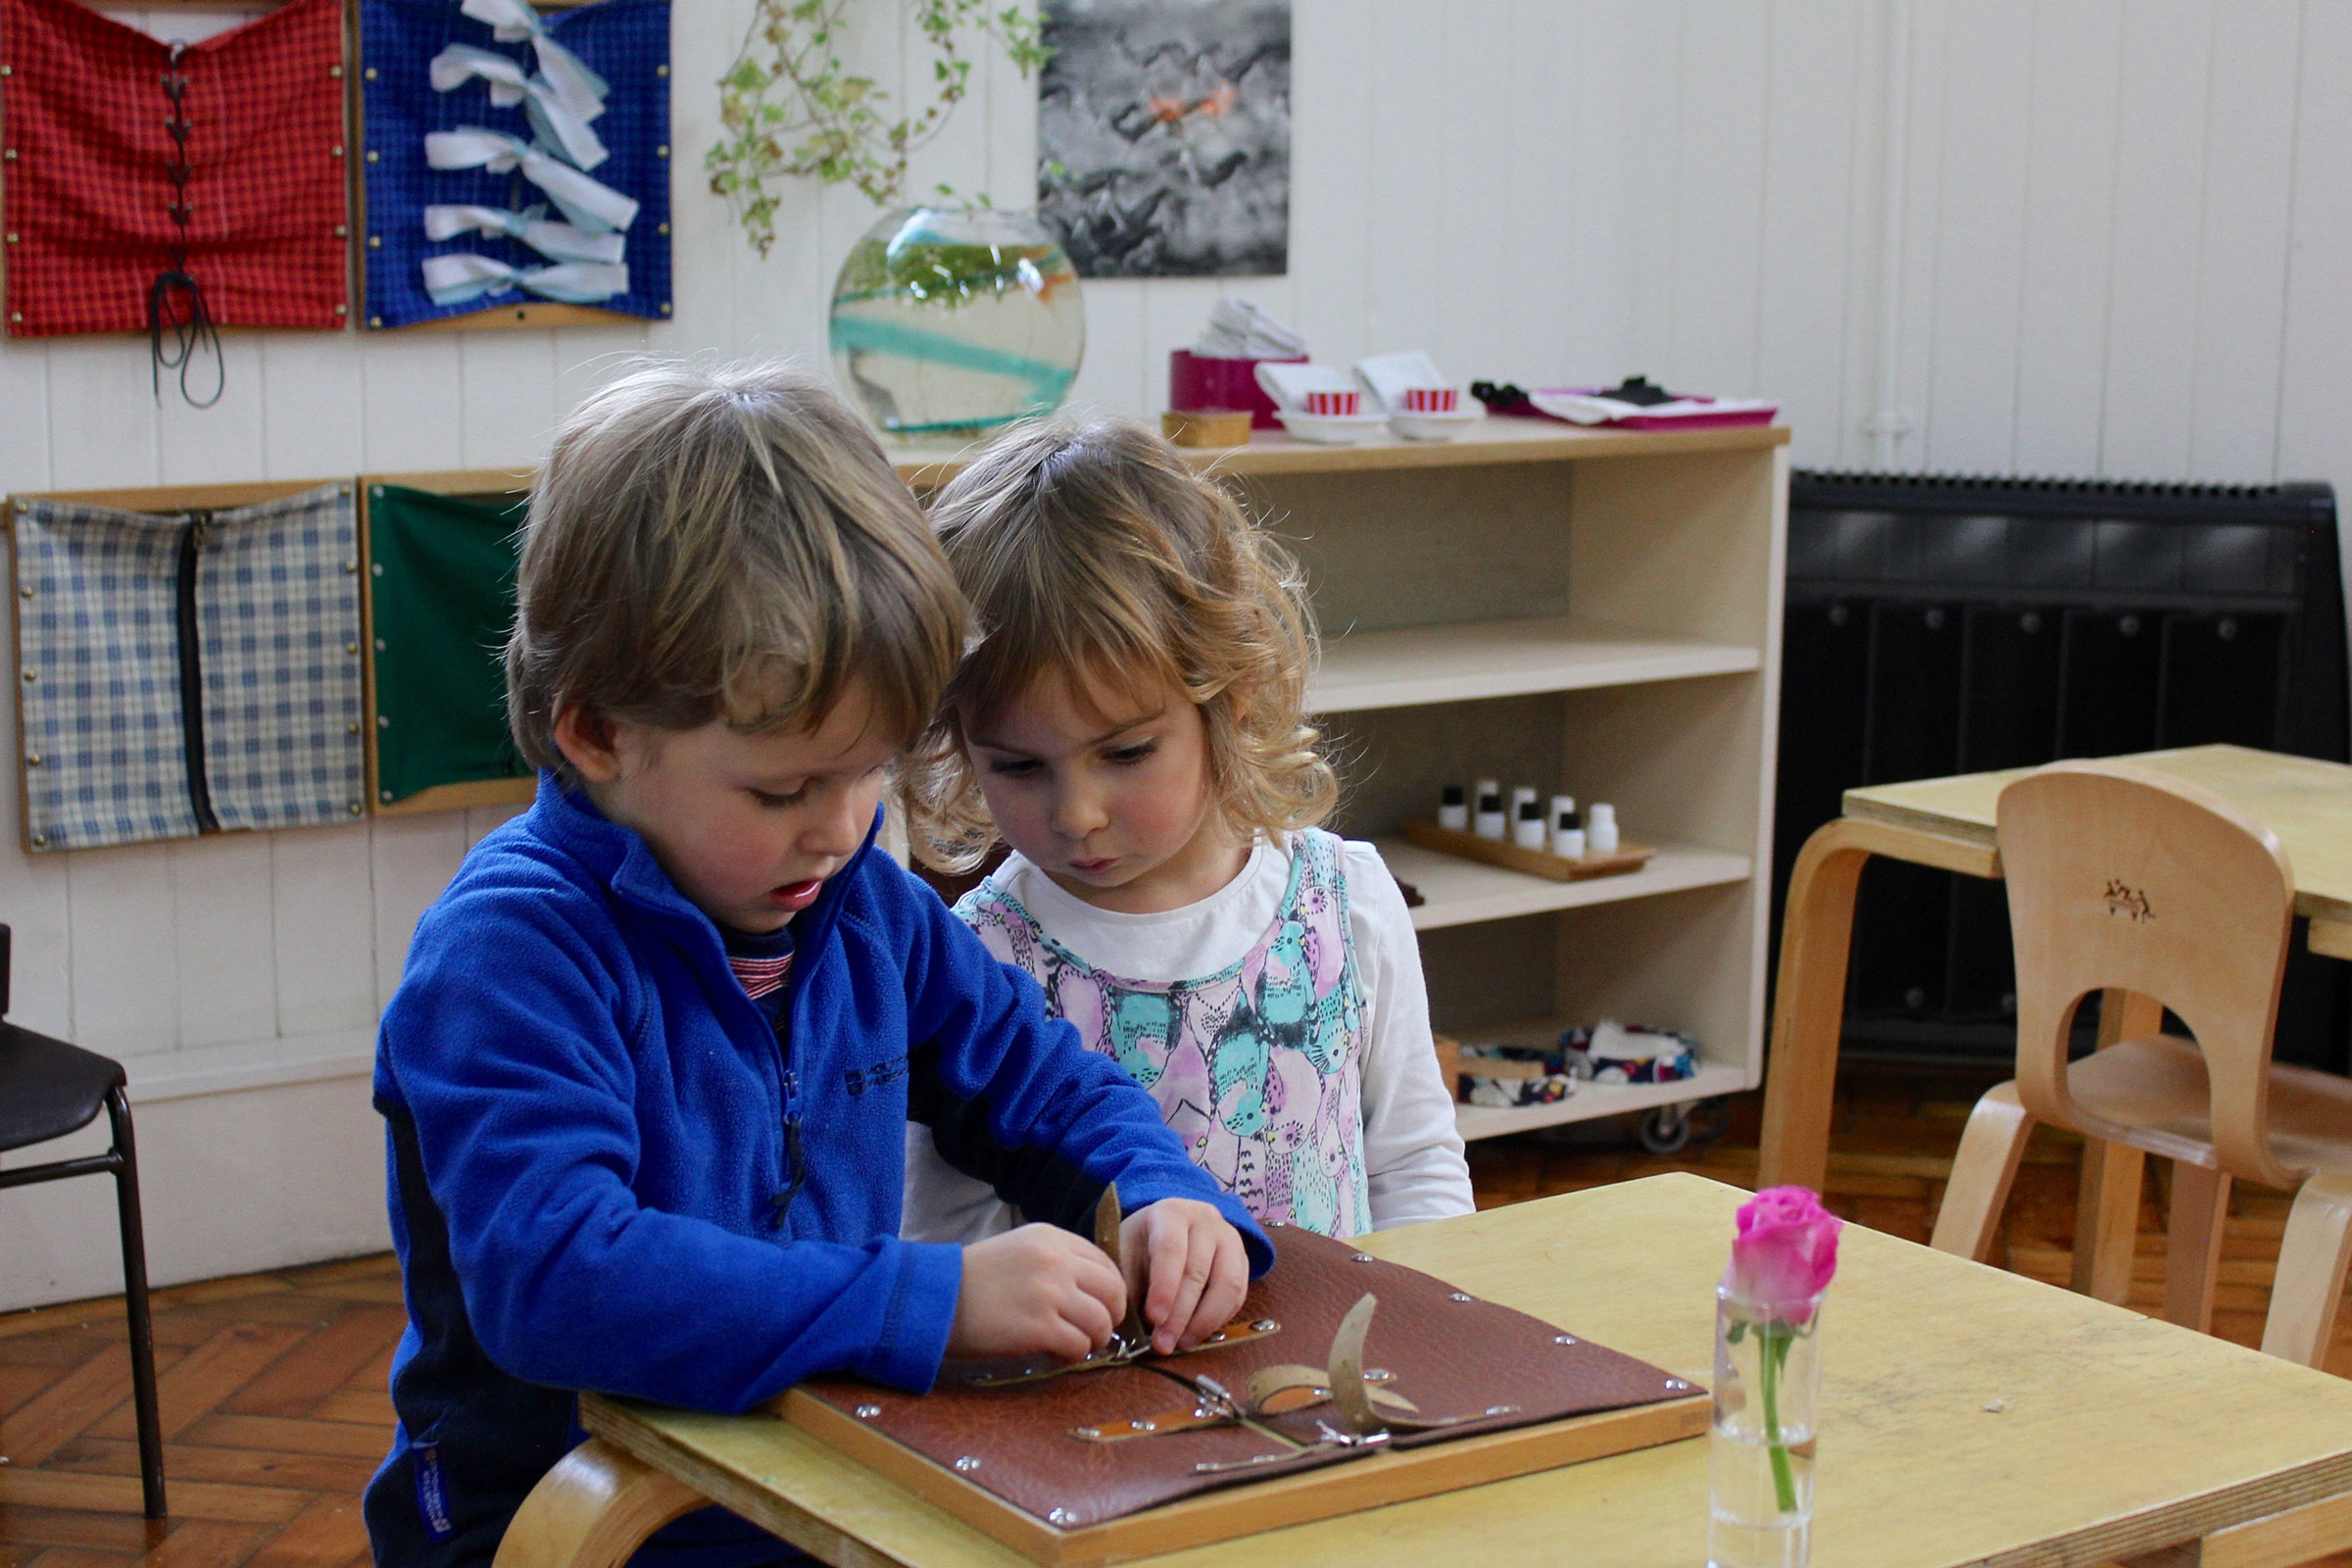 Child demonstrating Montessori material to another child